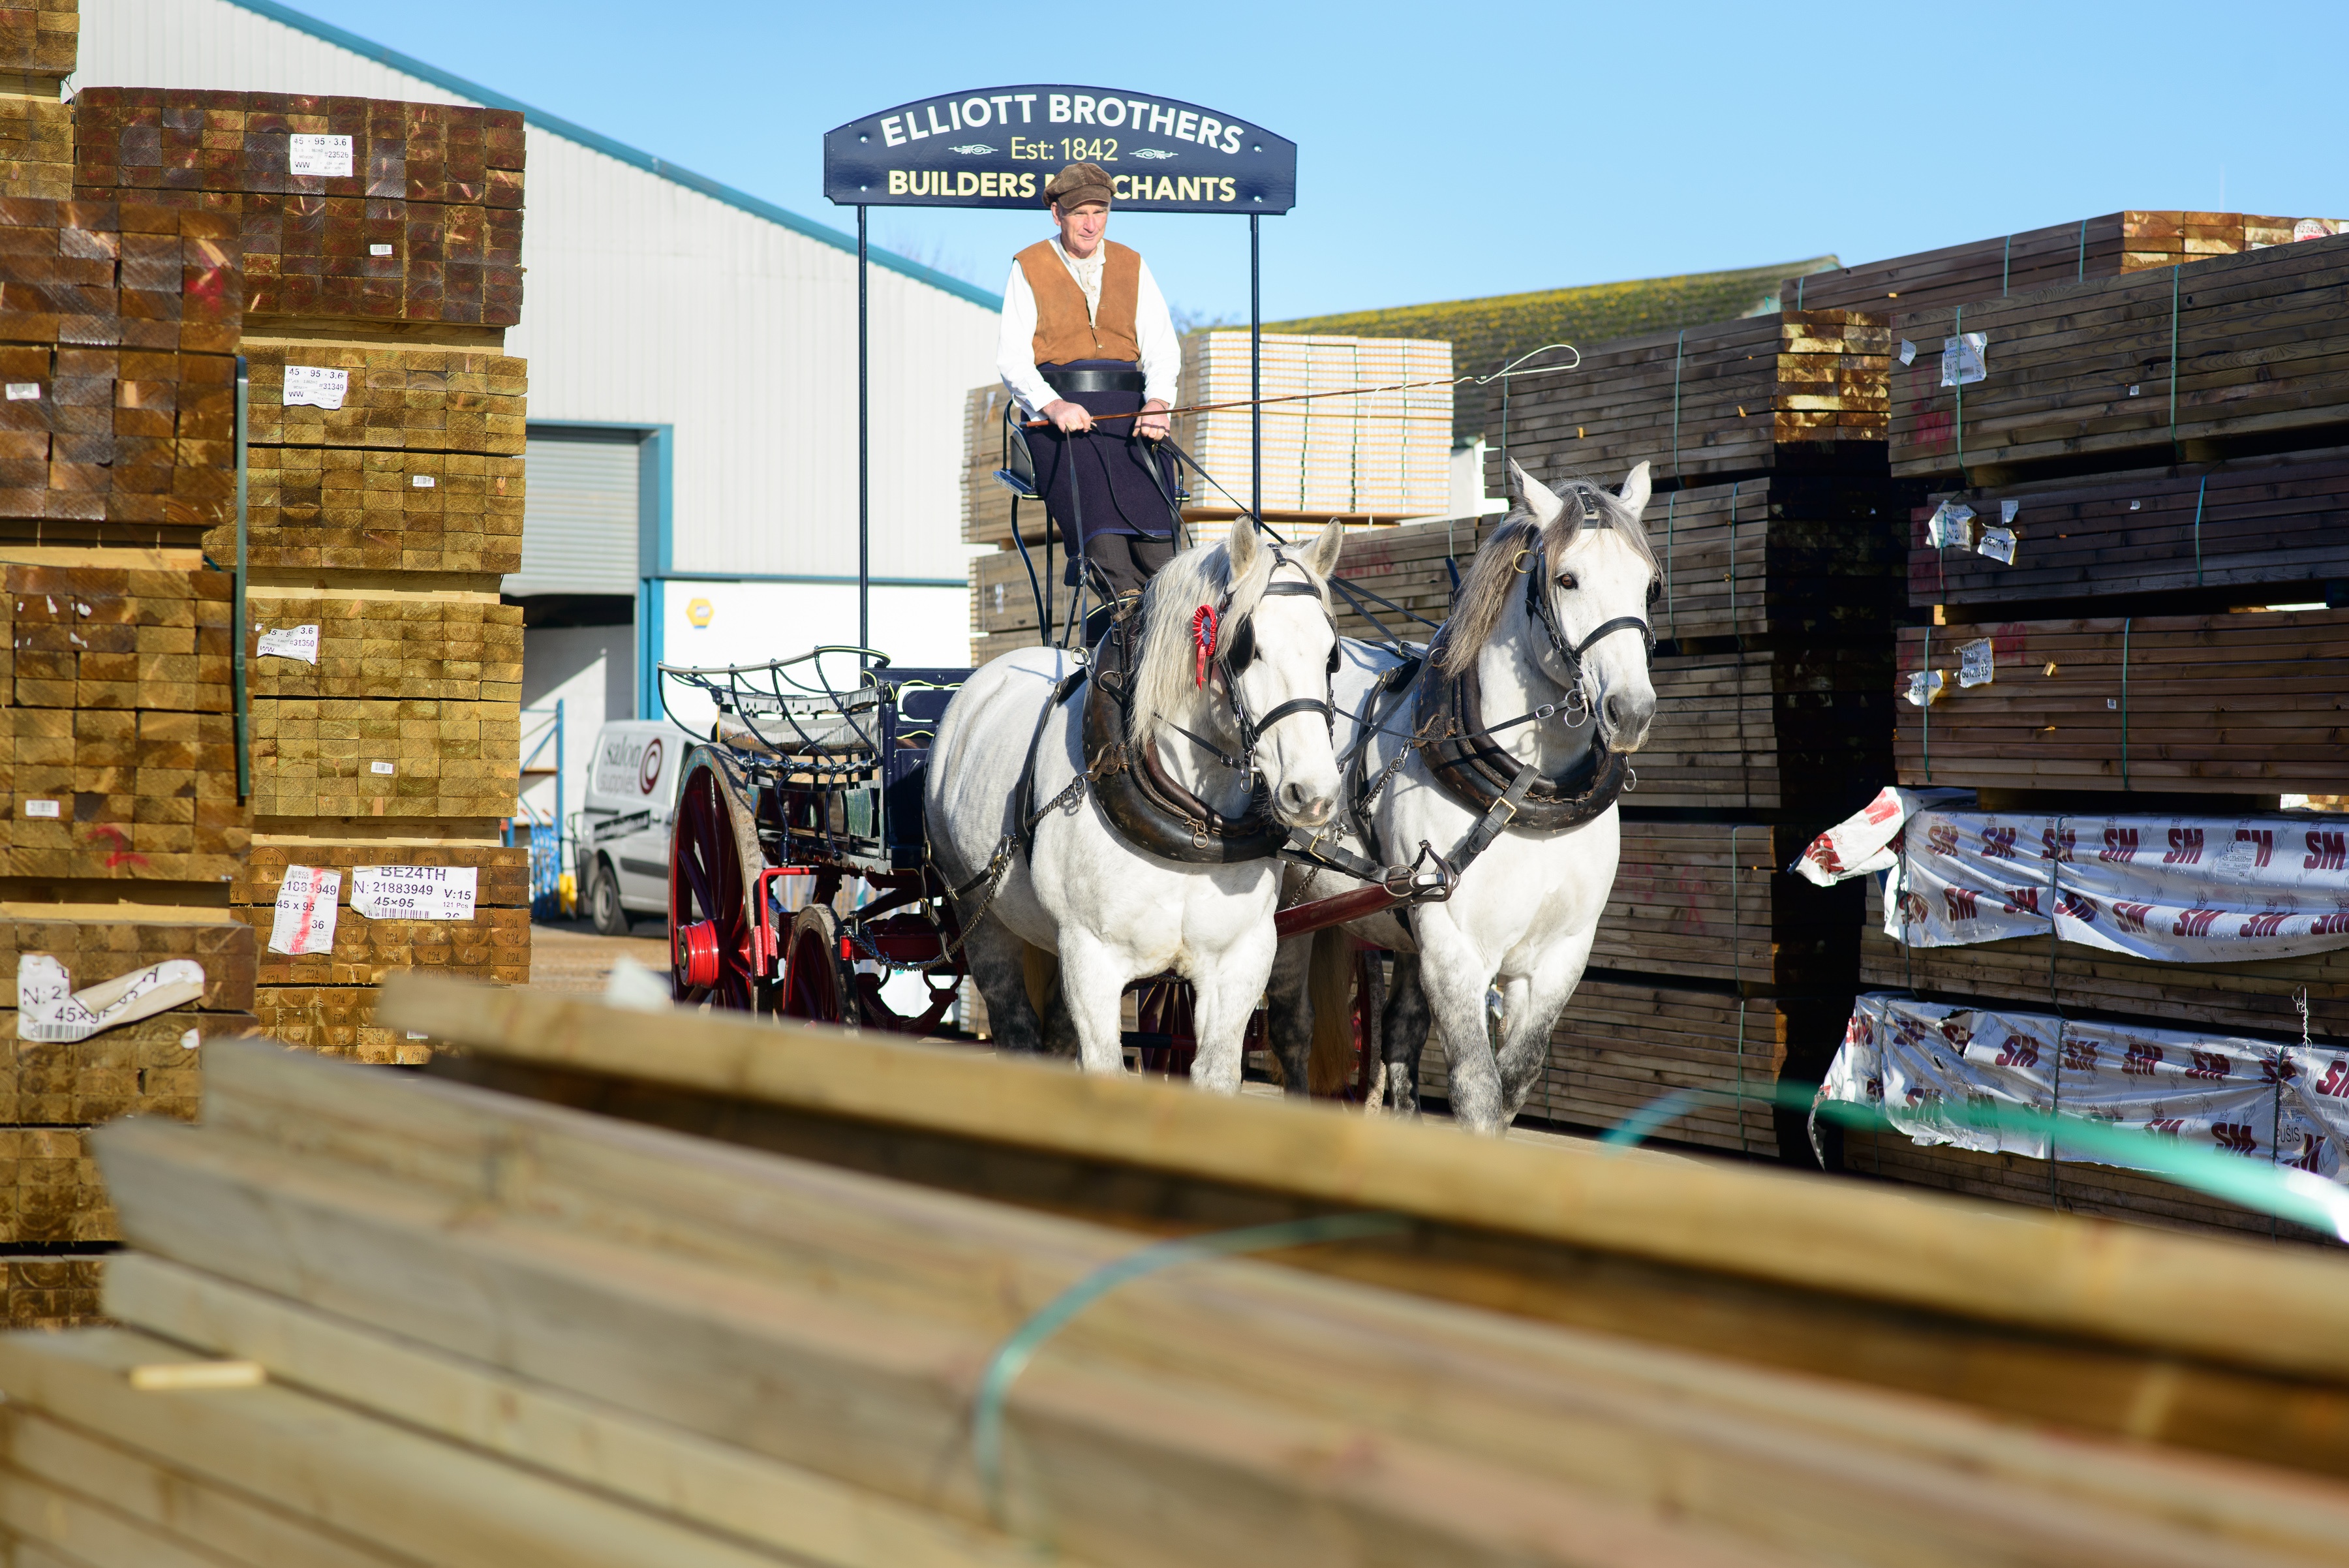 The horse and cart arriving into the timber yard